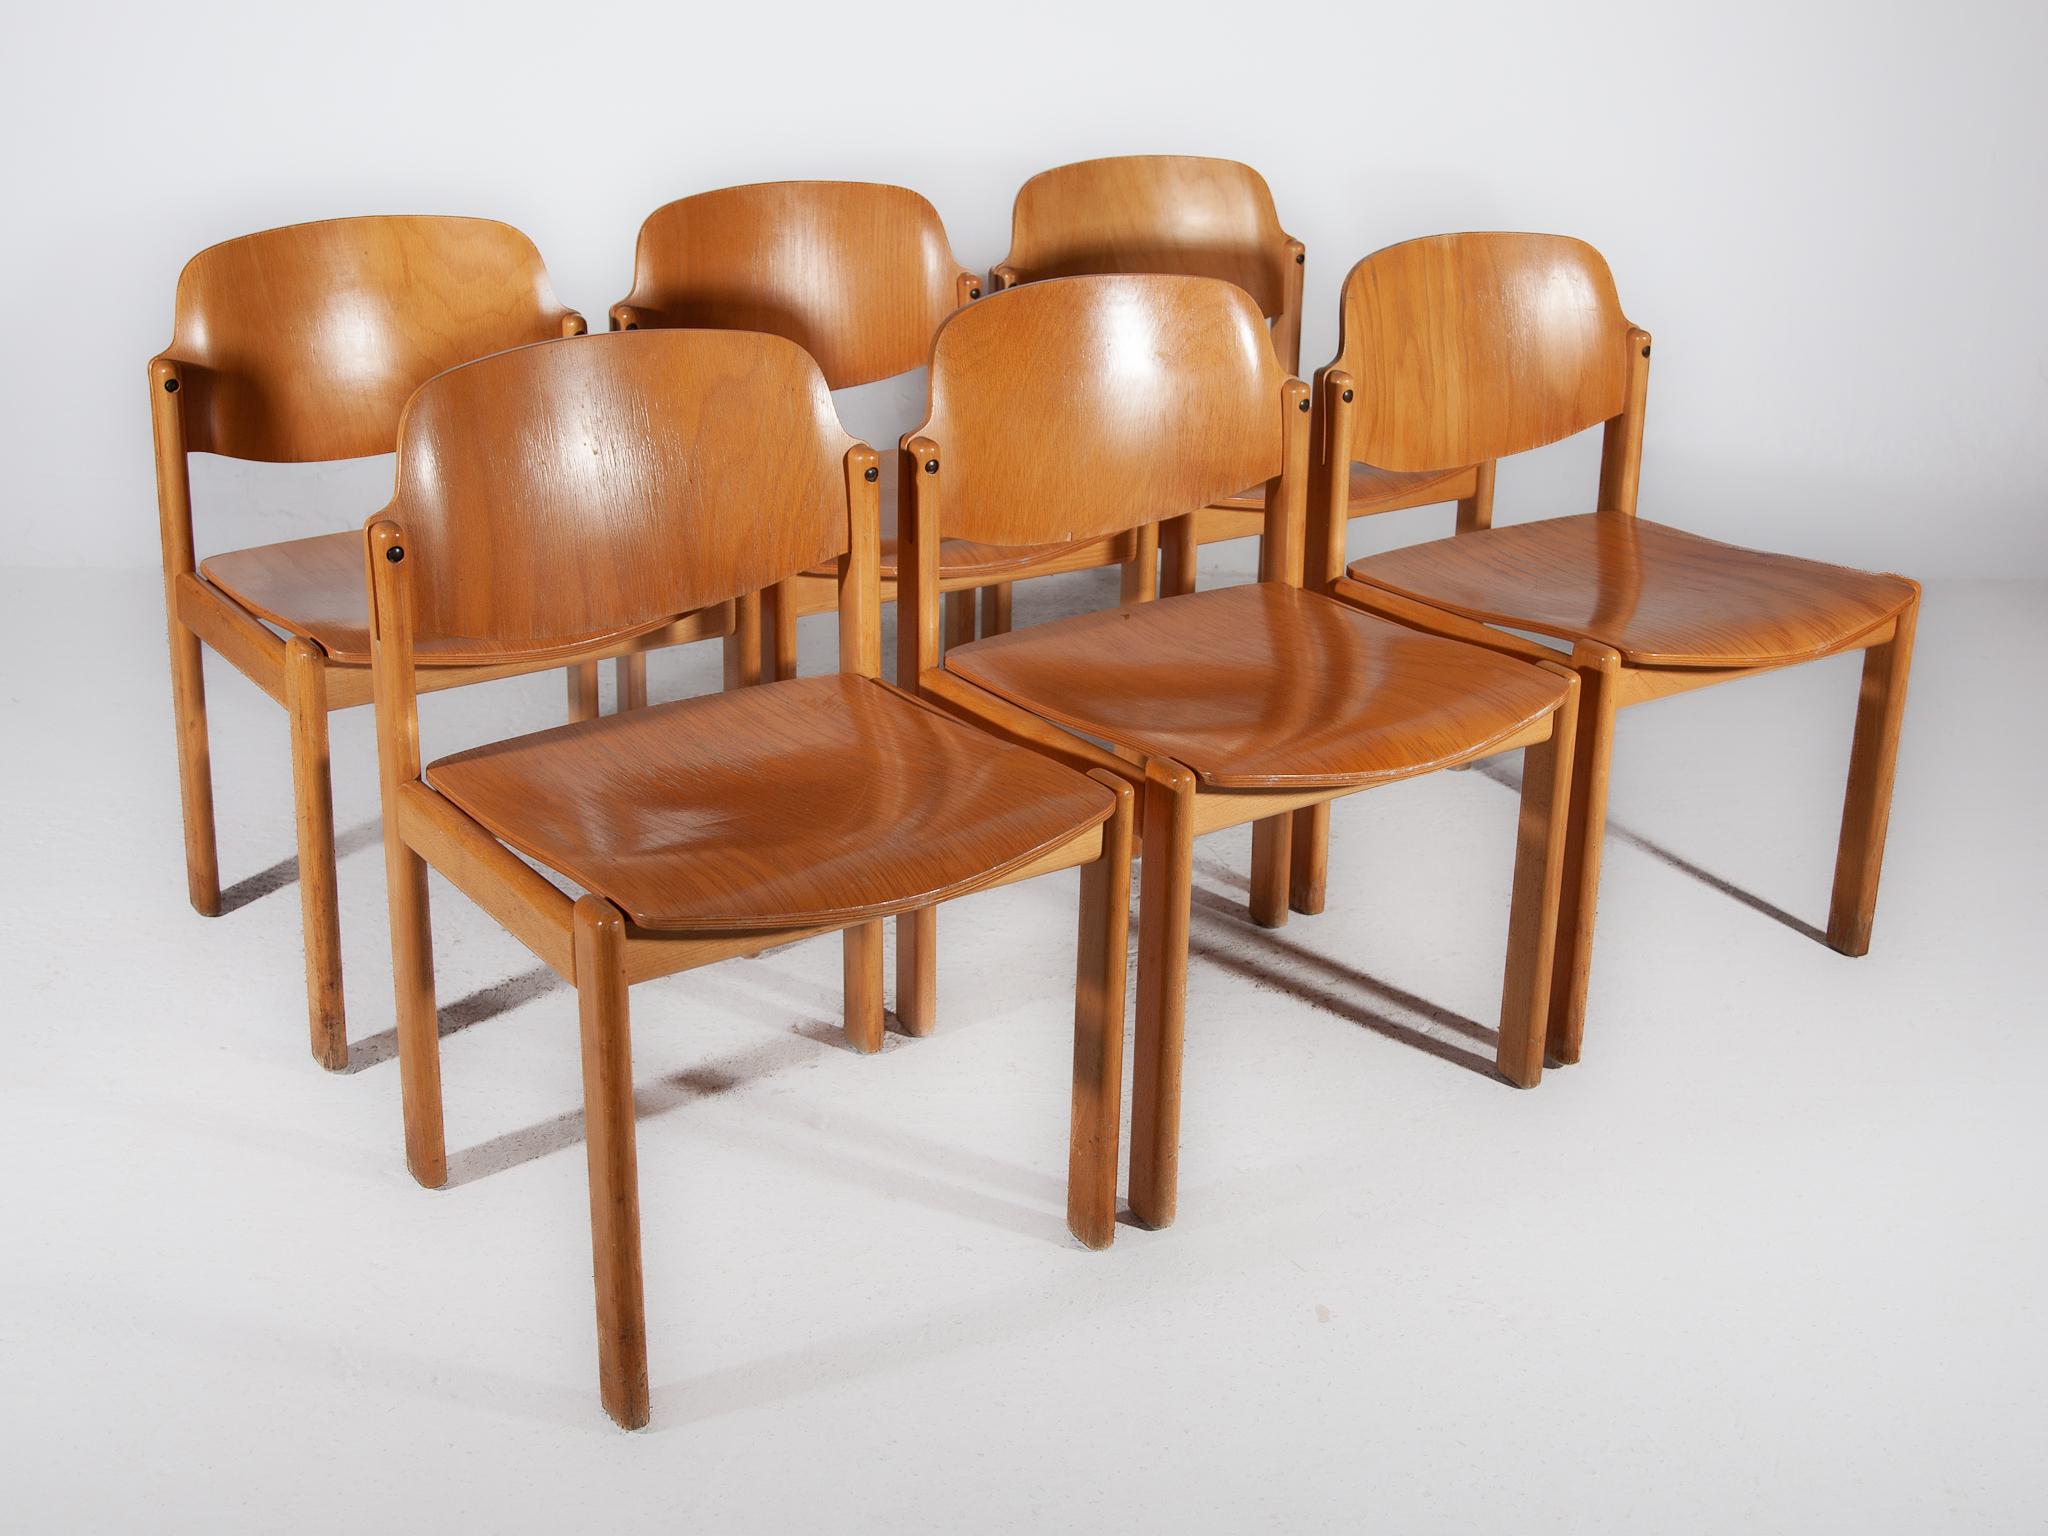 Set of Twelve Beech Wood Dining Chairs, Germany 1970s For Sale 6